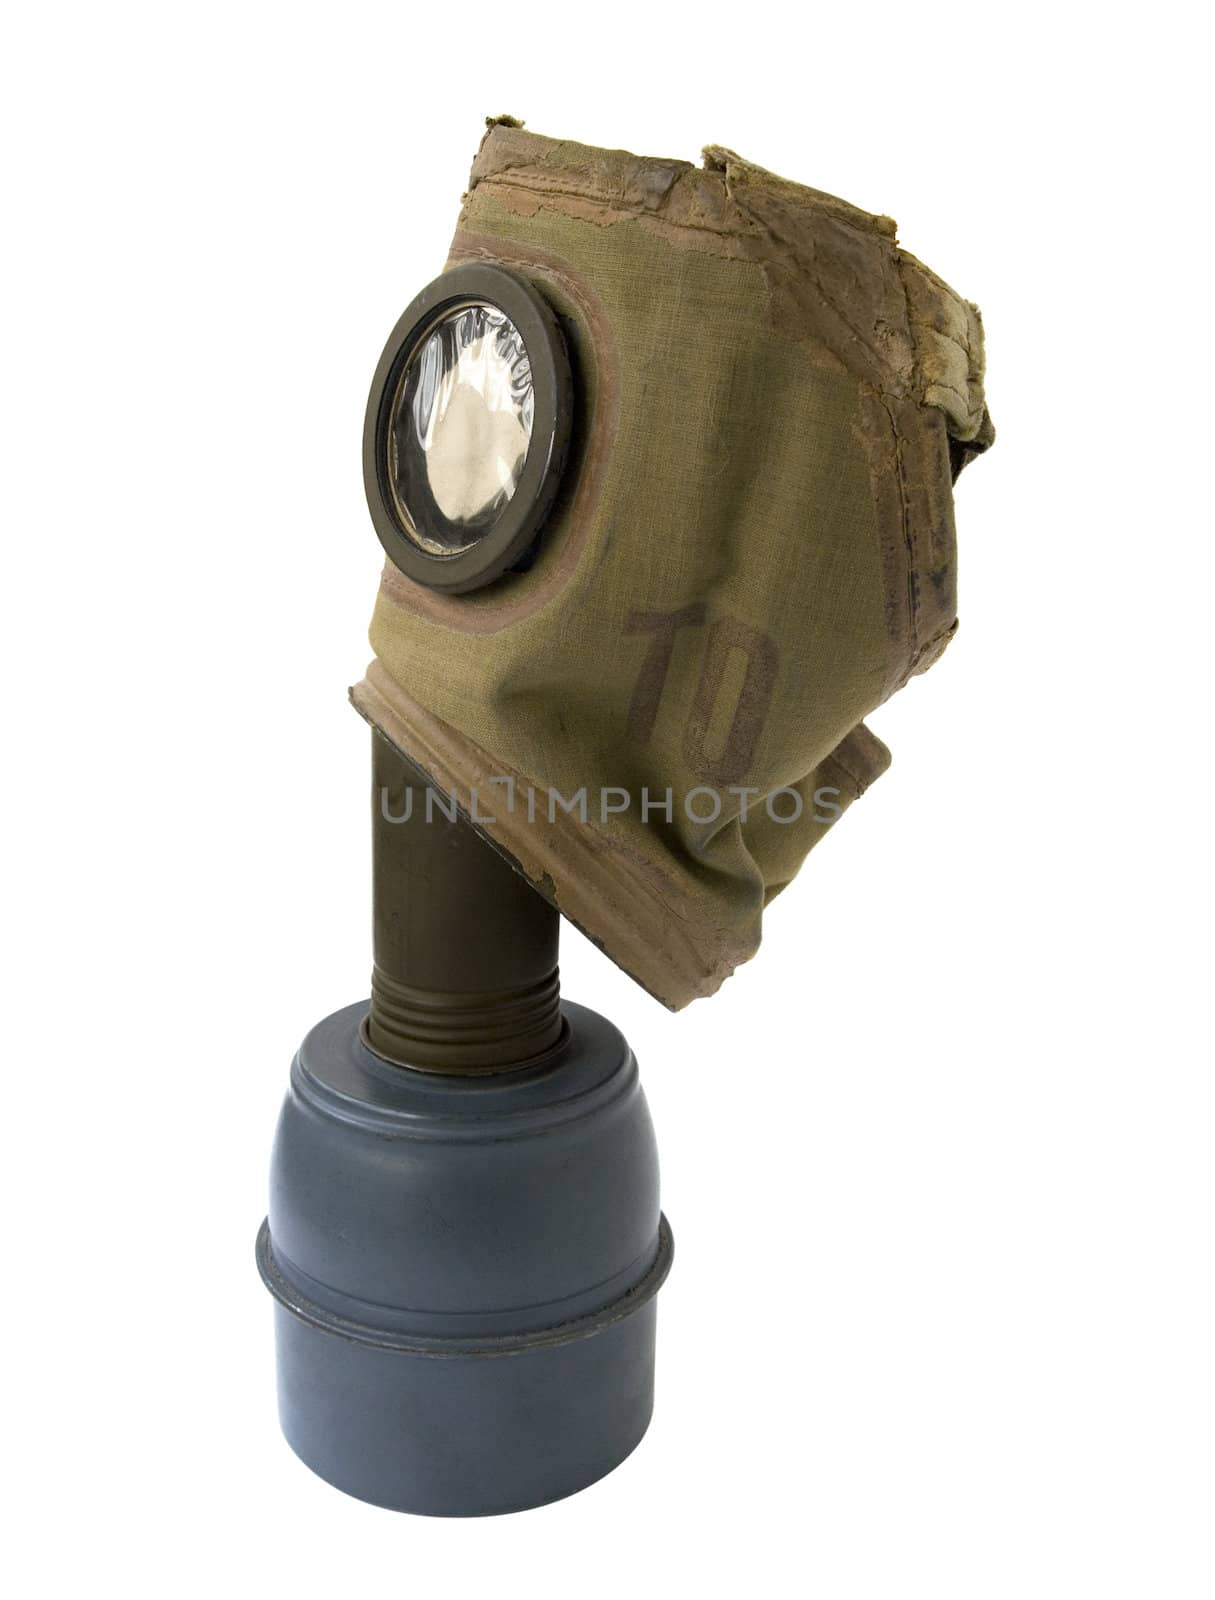 gas mask by daboost